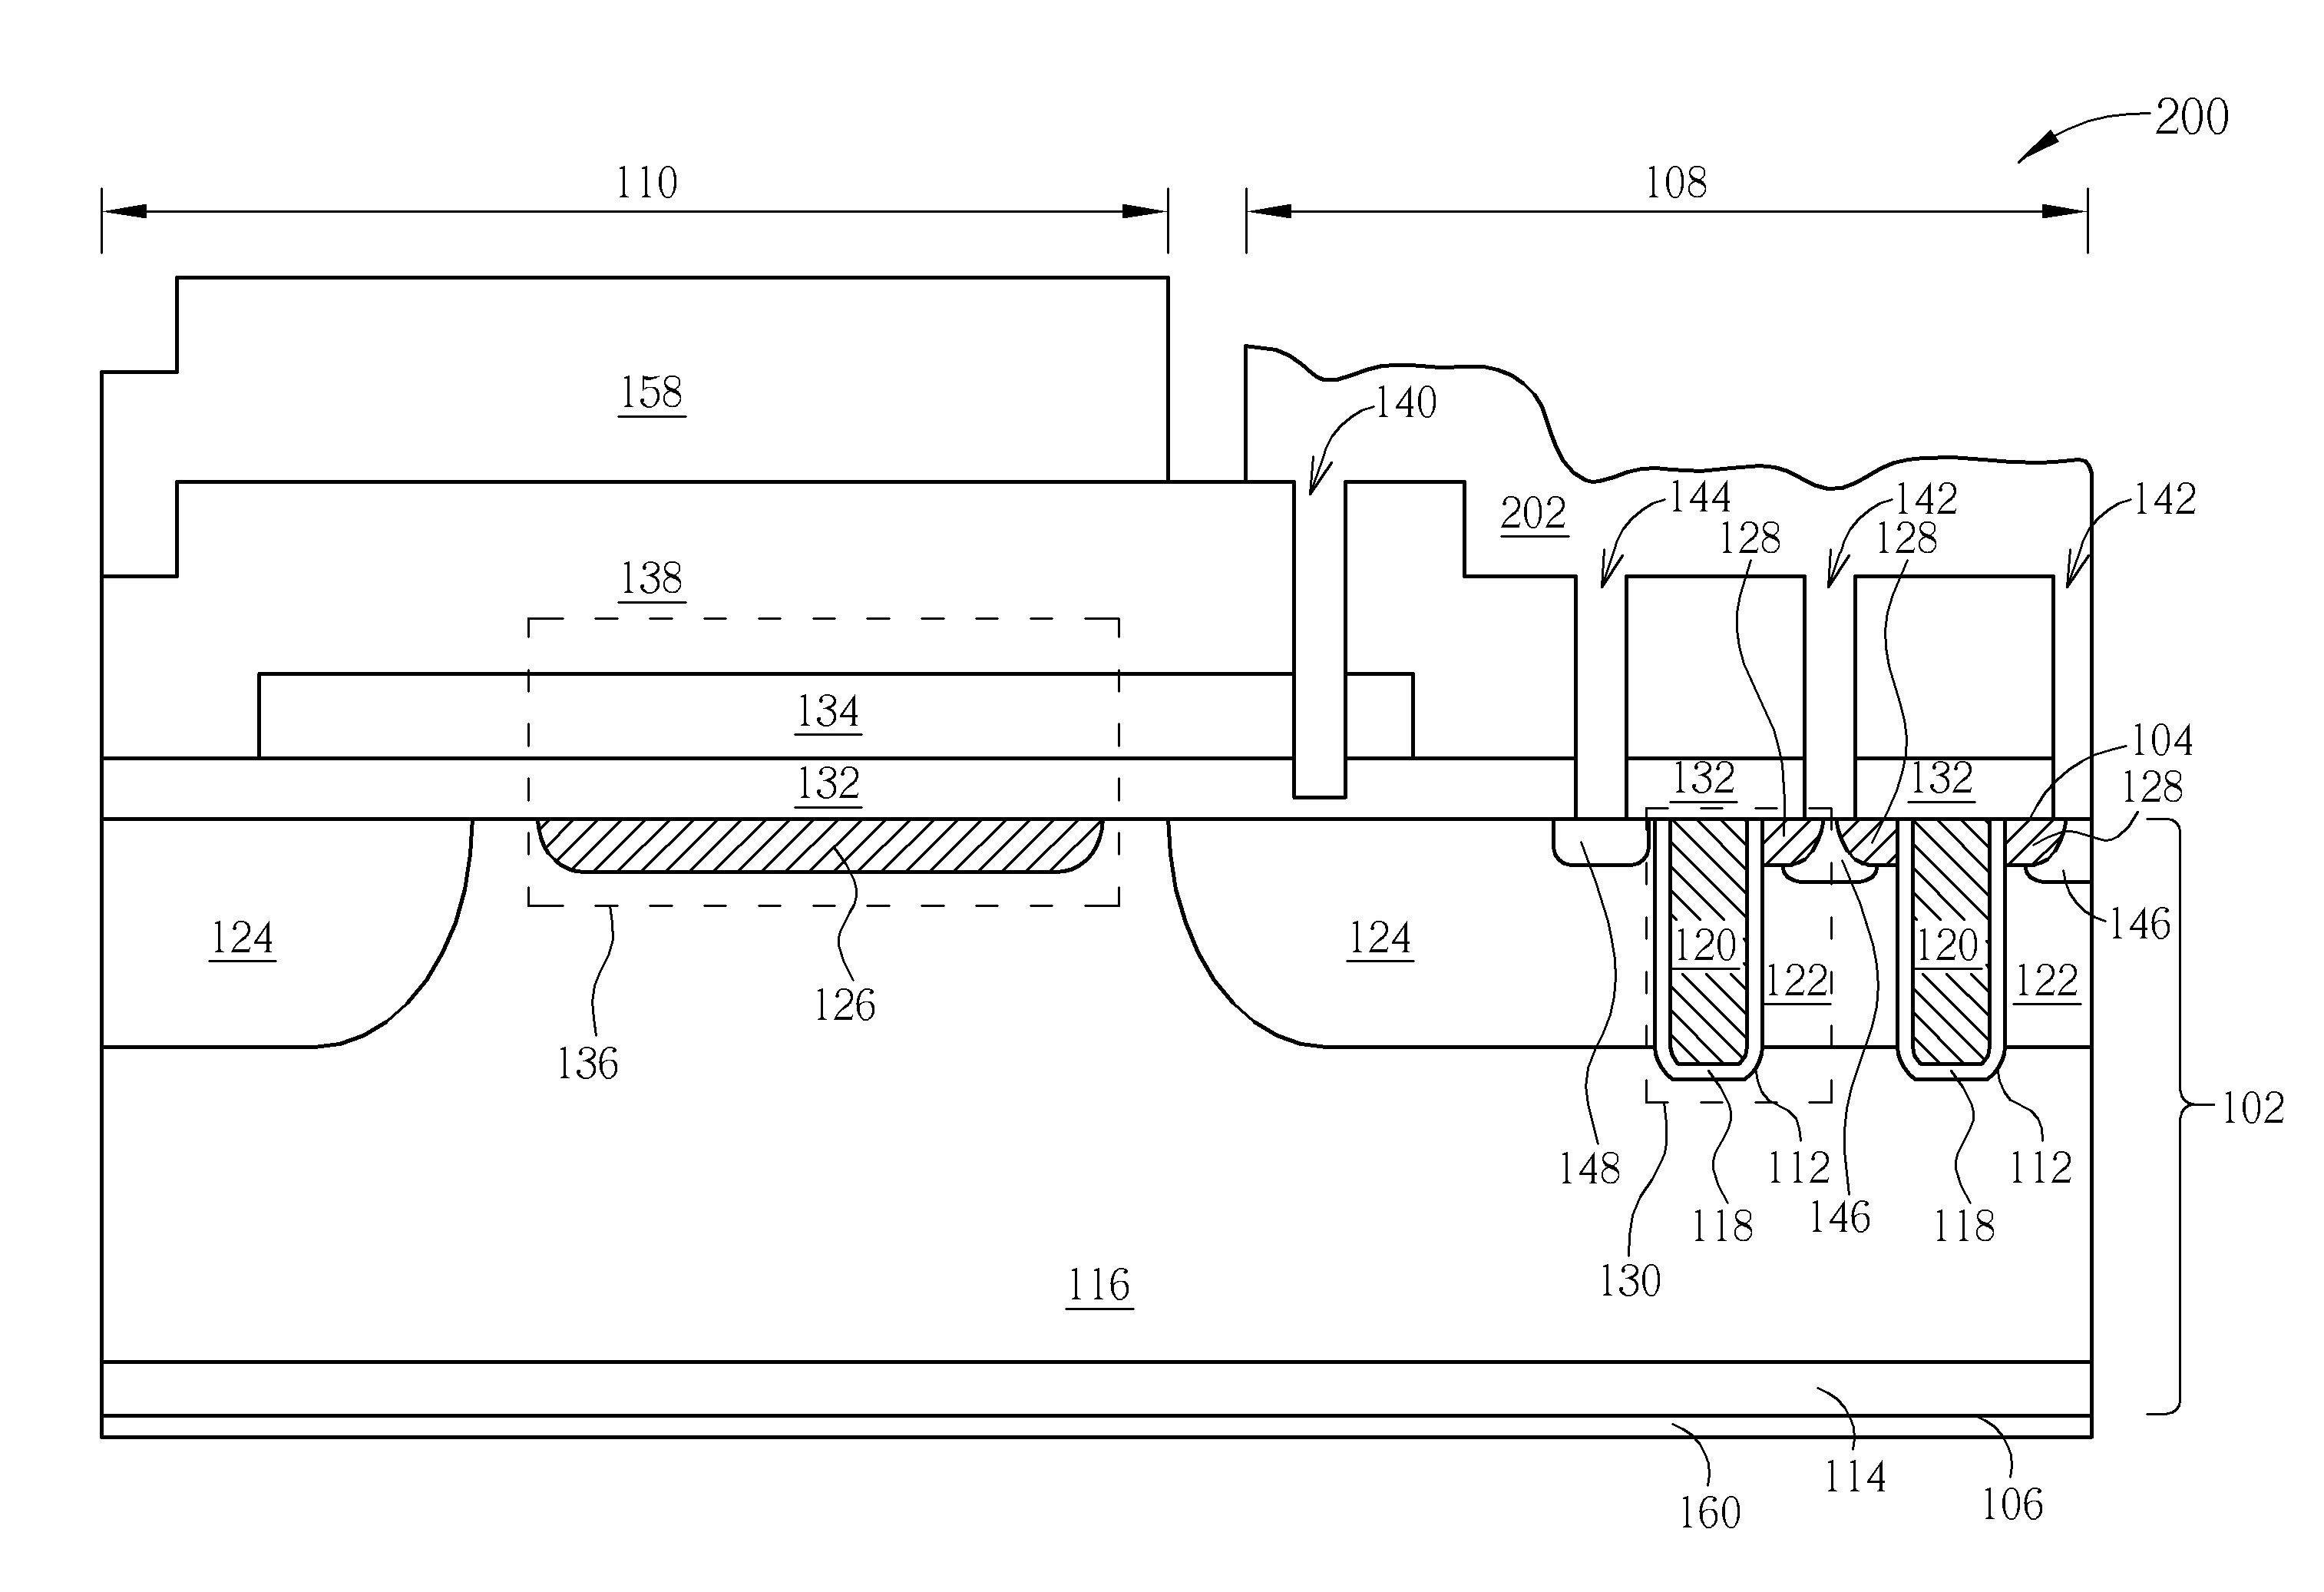 Semiconductor device having extra capacitor structure